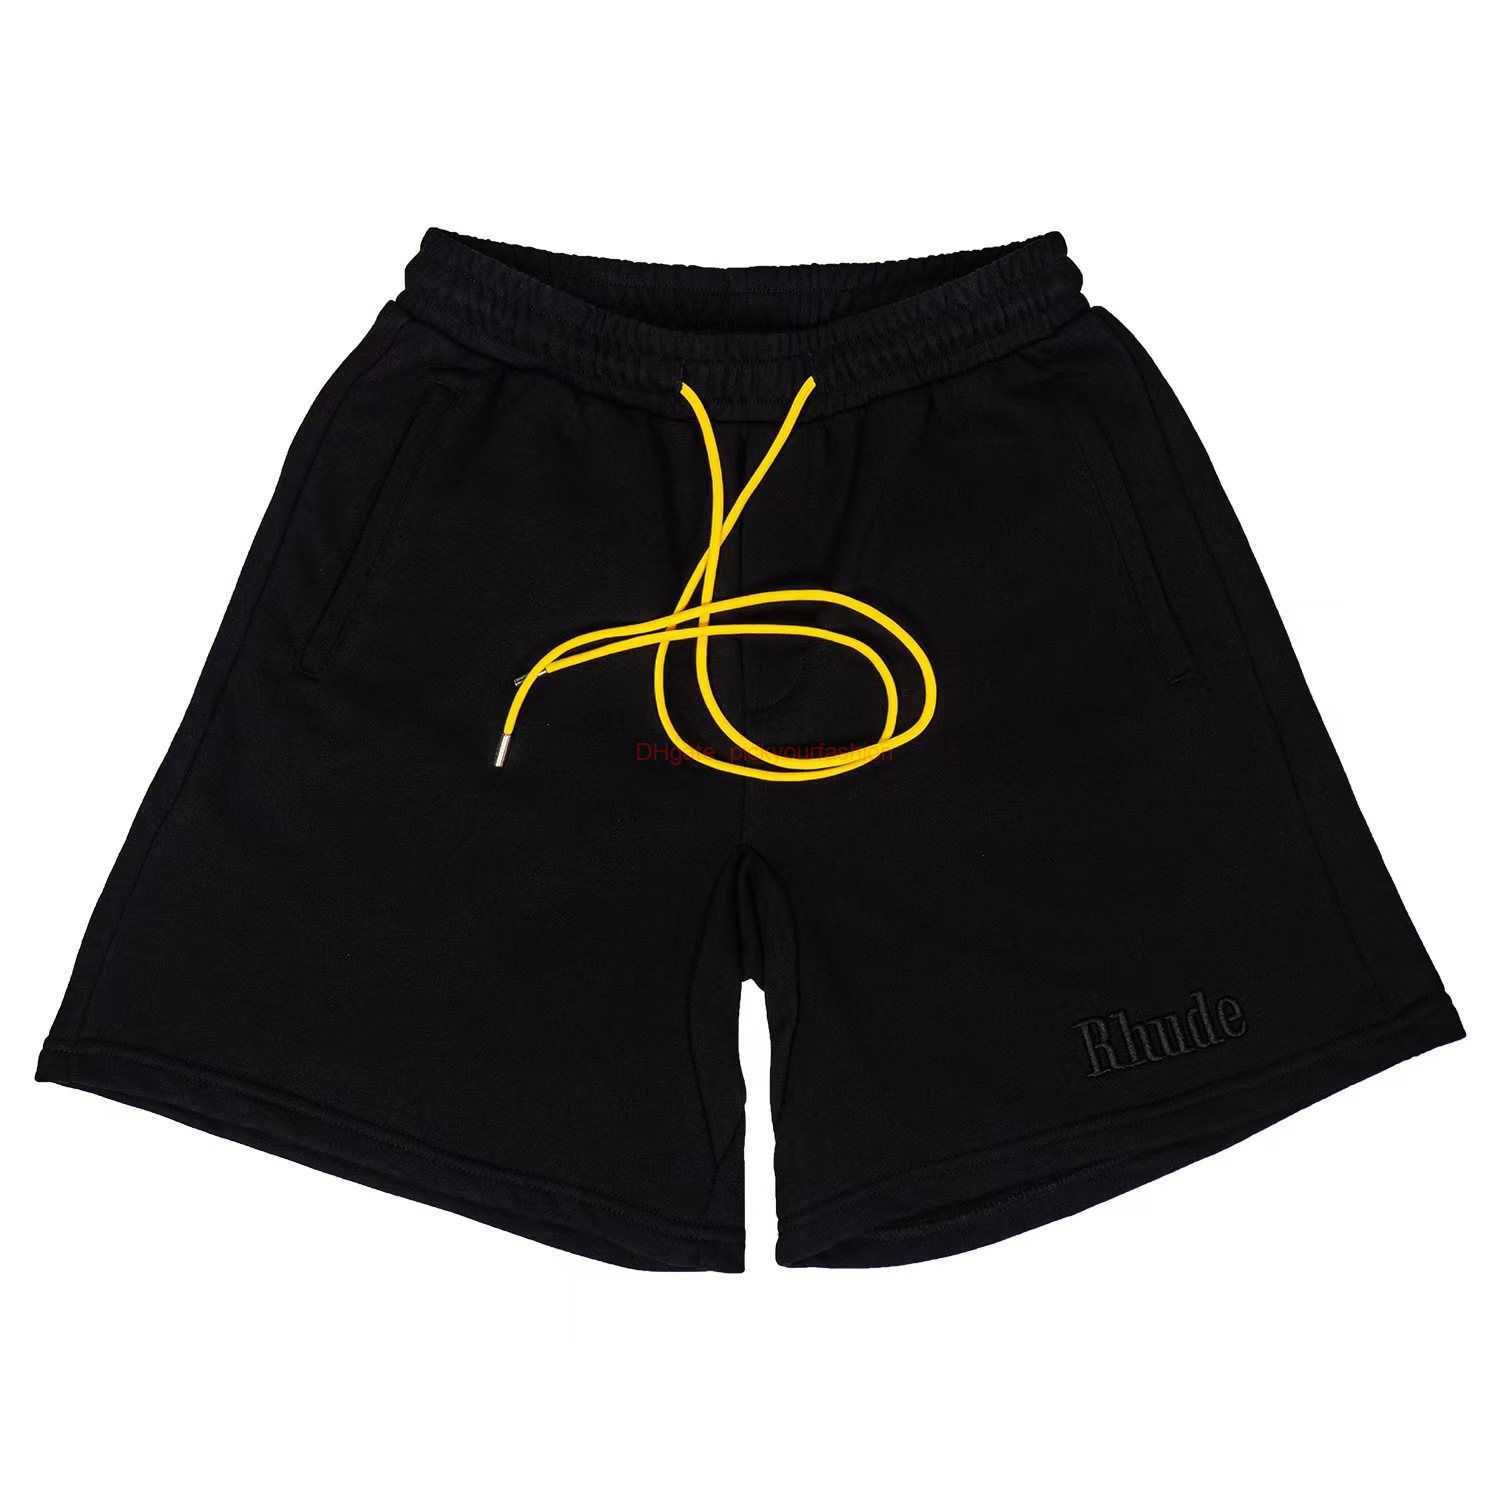 Designer Short Fashion Casual Clothing Beach shorts Rhude Embroidered Solid Color Casual Sports Capris Trendy Brand Loose Drawstring Shorts Joggers Sportswear Ou